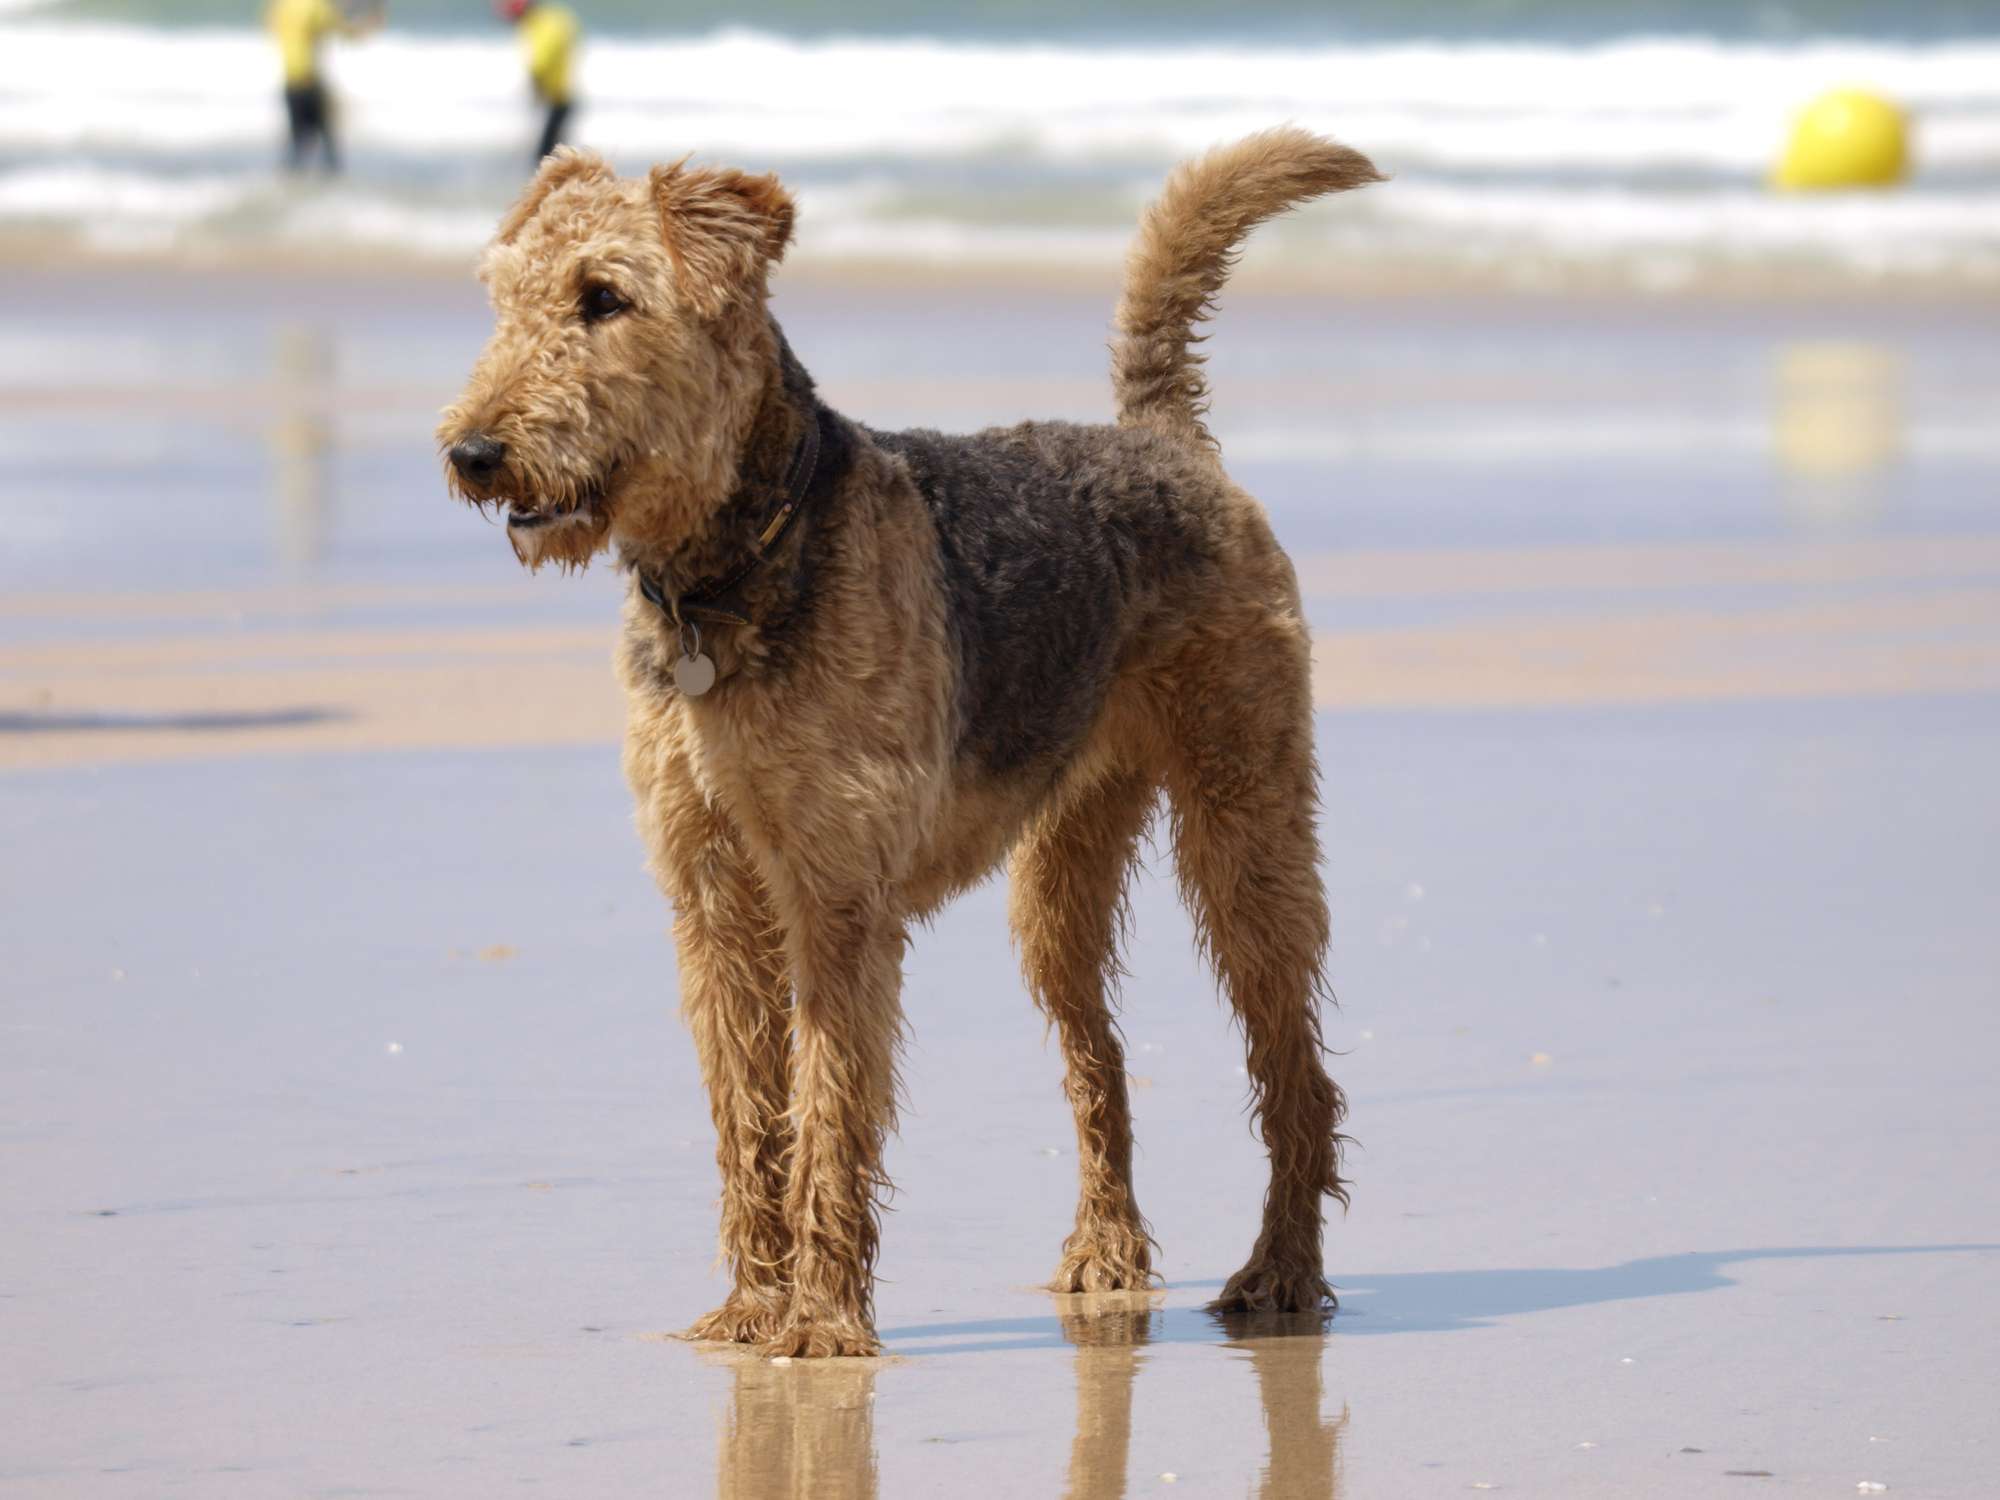 Airedale terrier standing on the beach